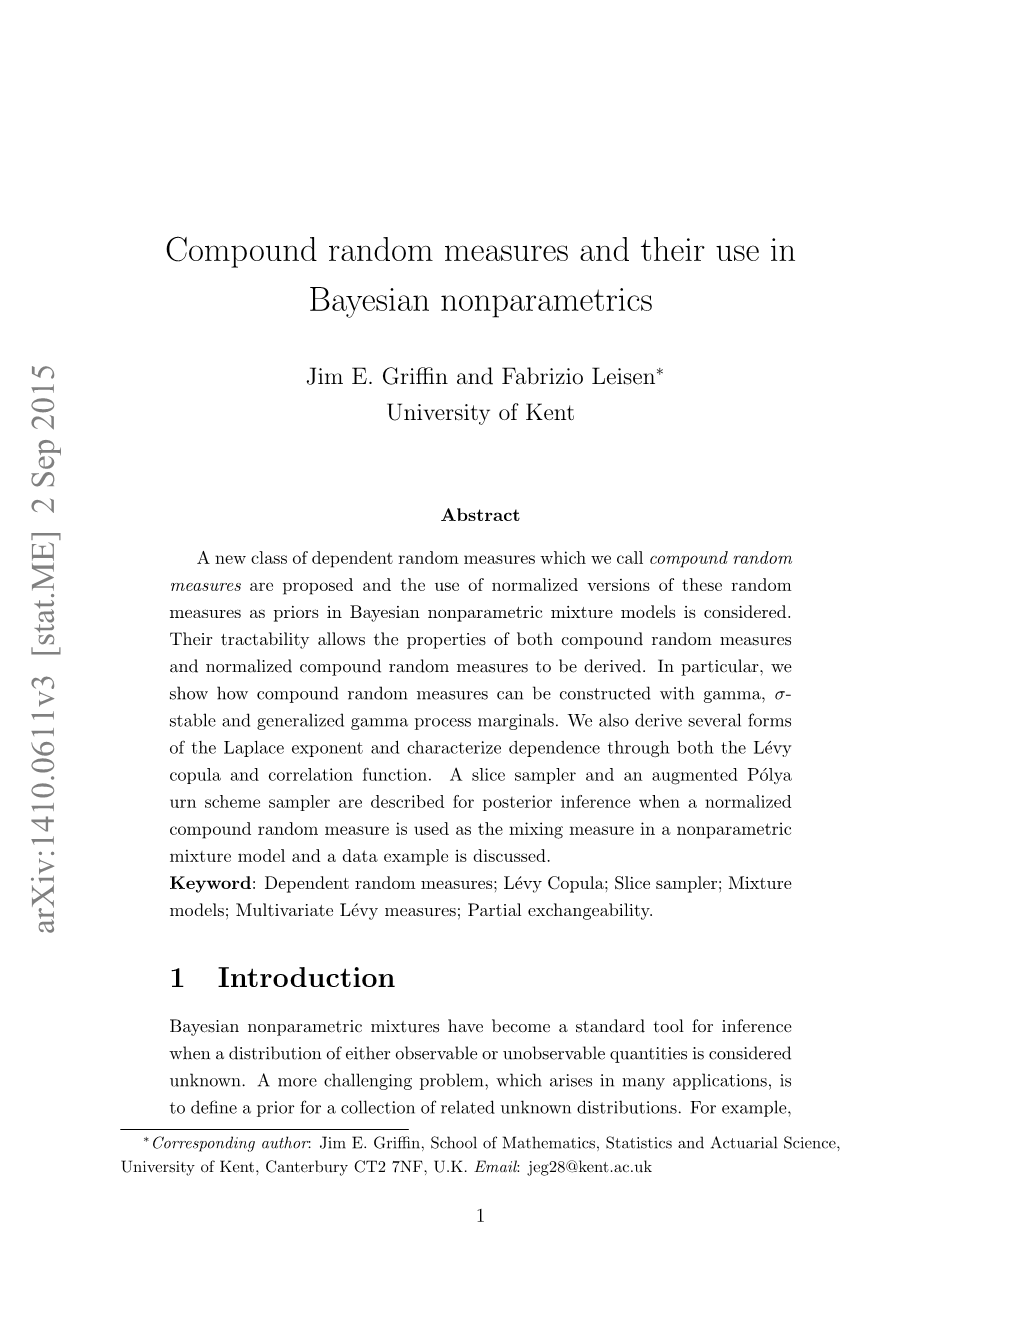 Compound Random Measures and Their Use in Bayesian Nonparametrics